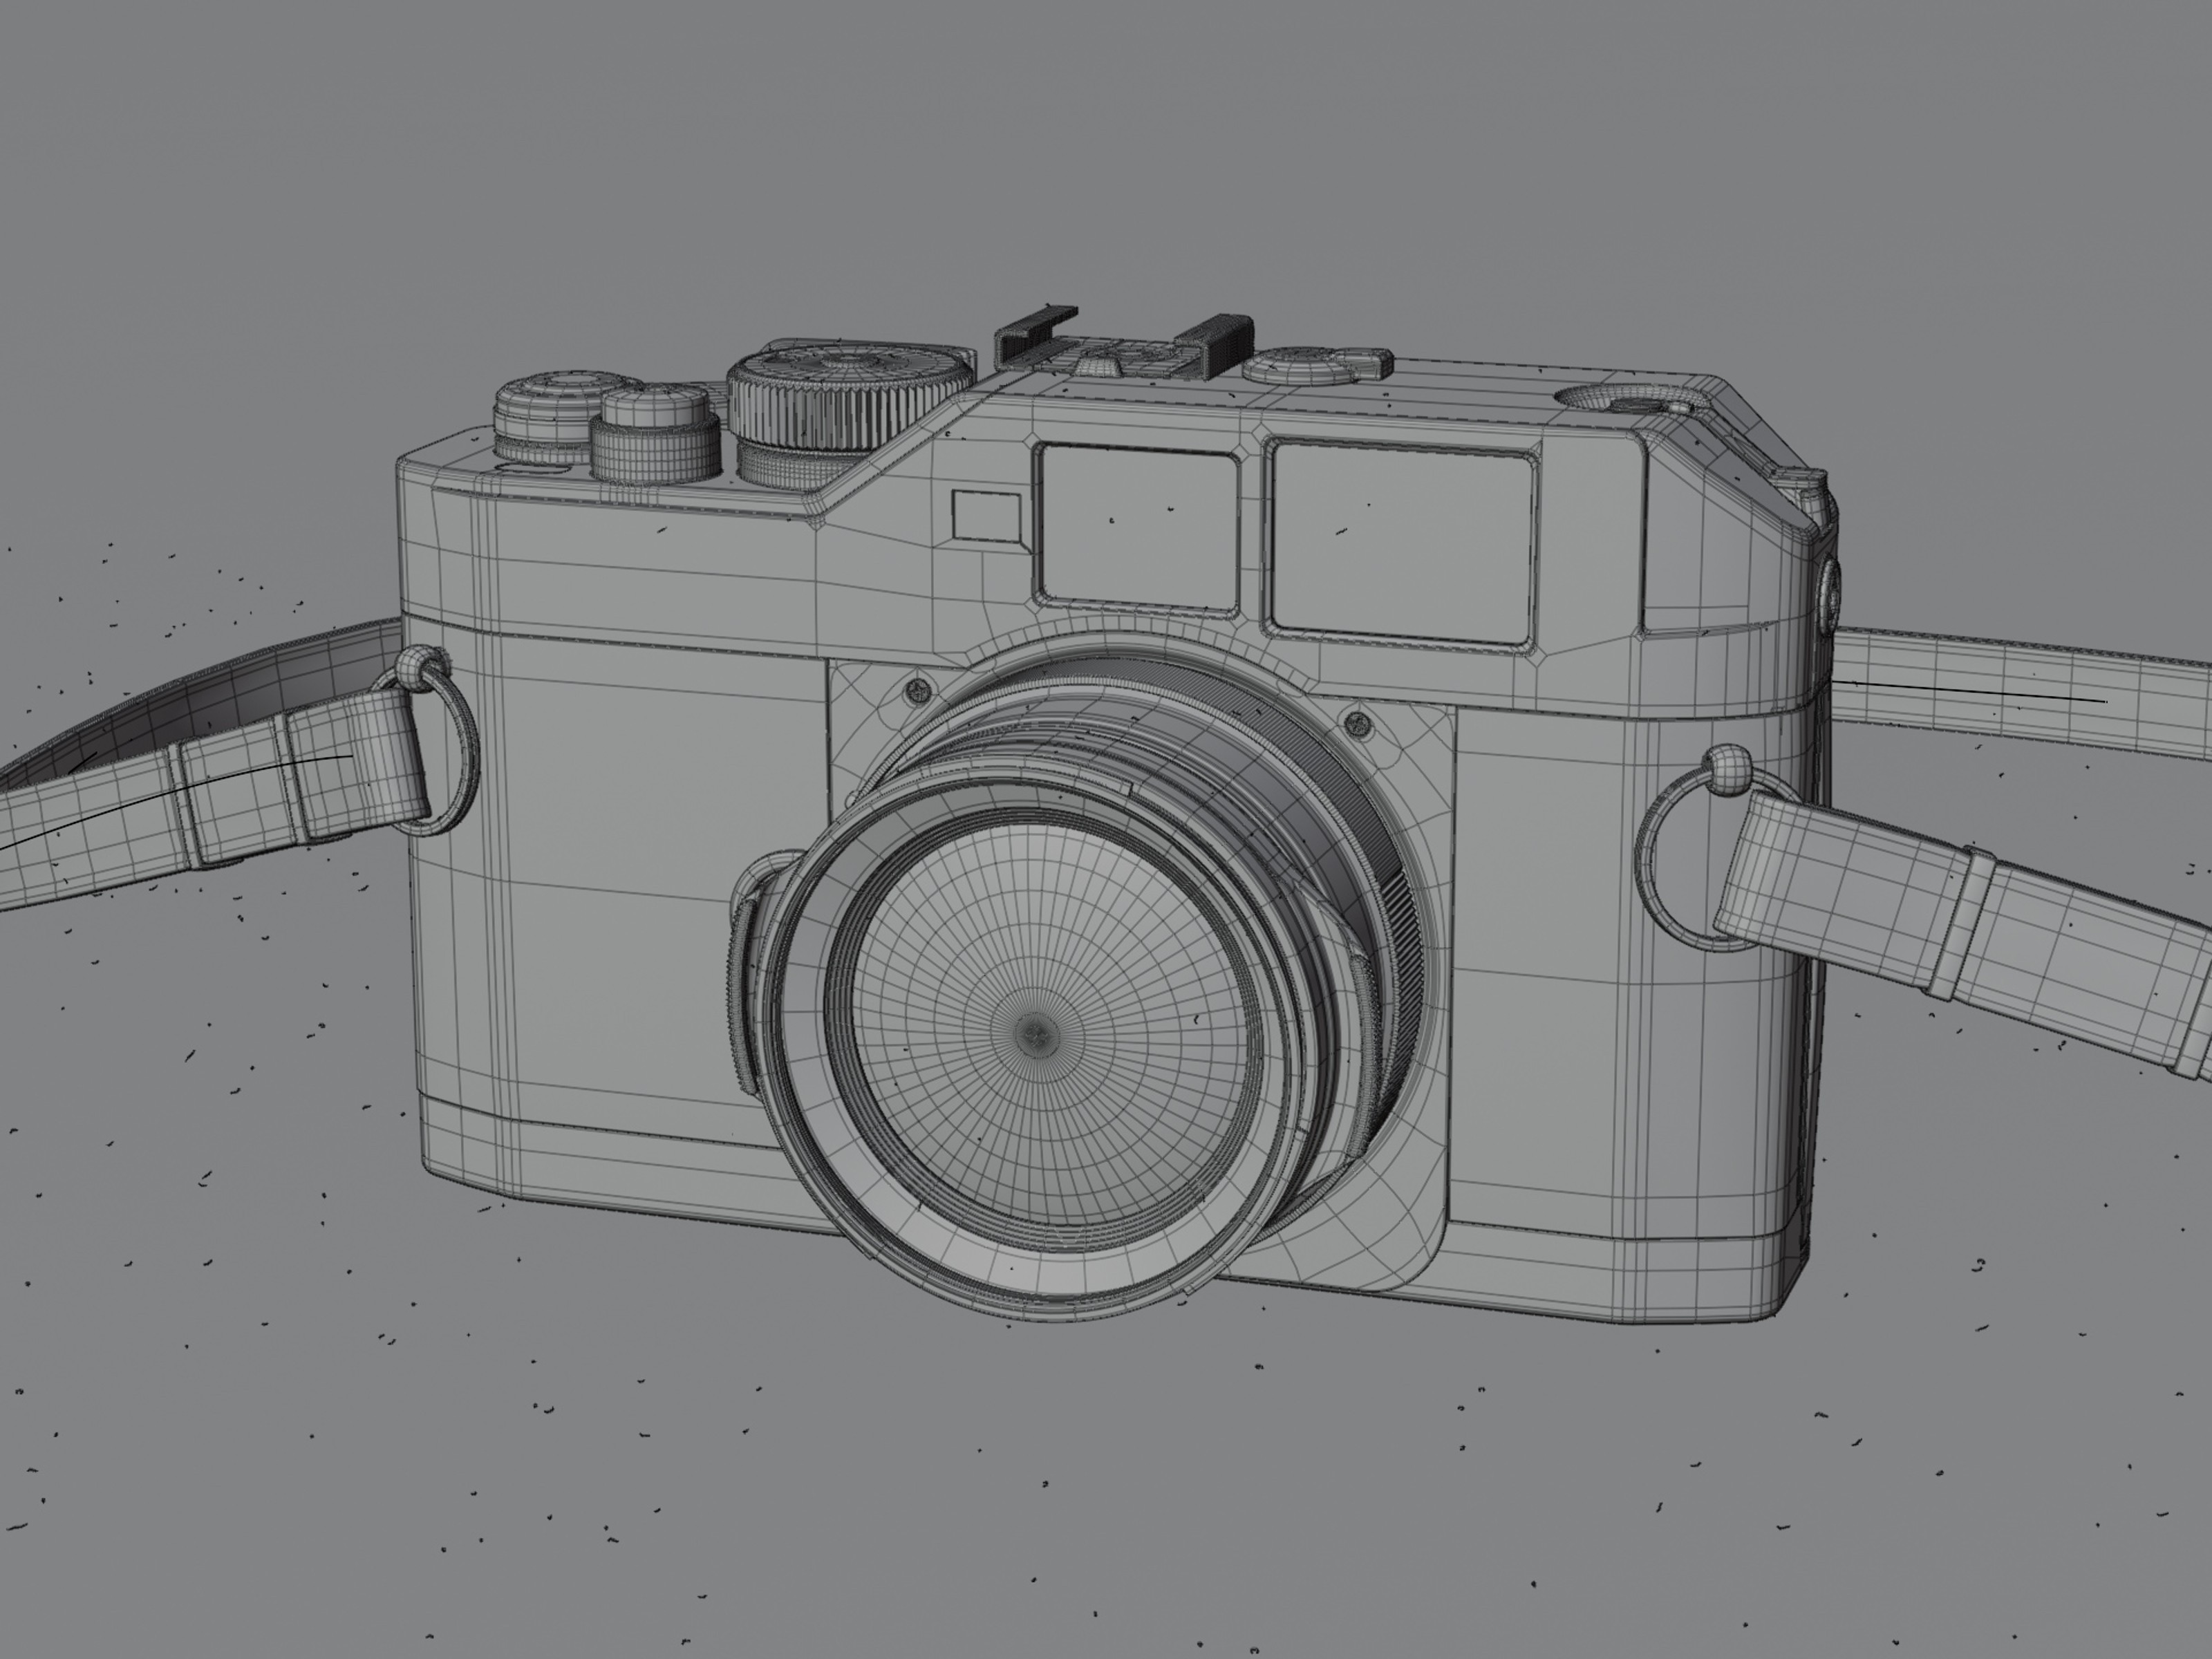 Wireframe render of the camera.